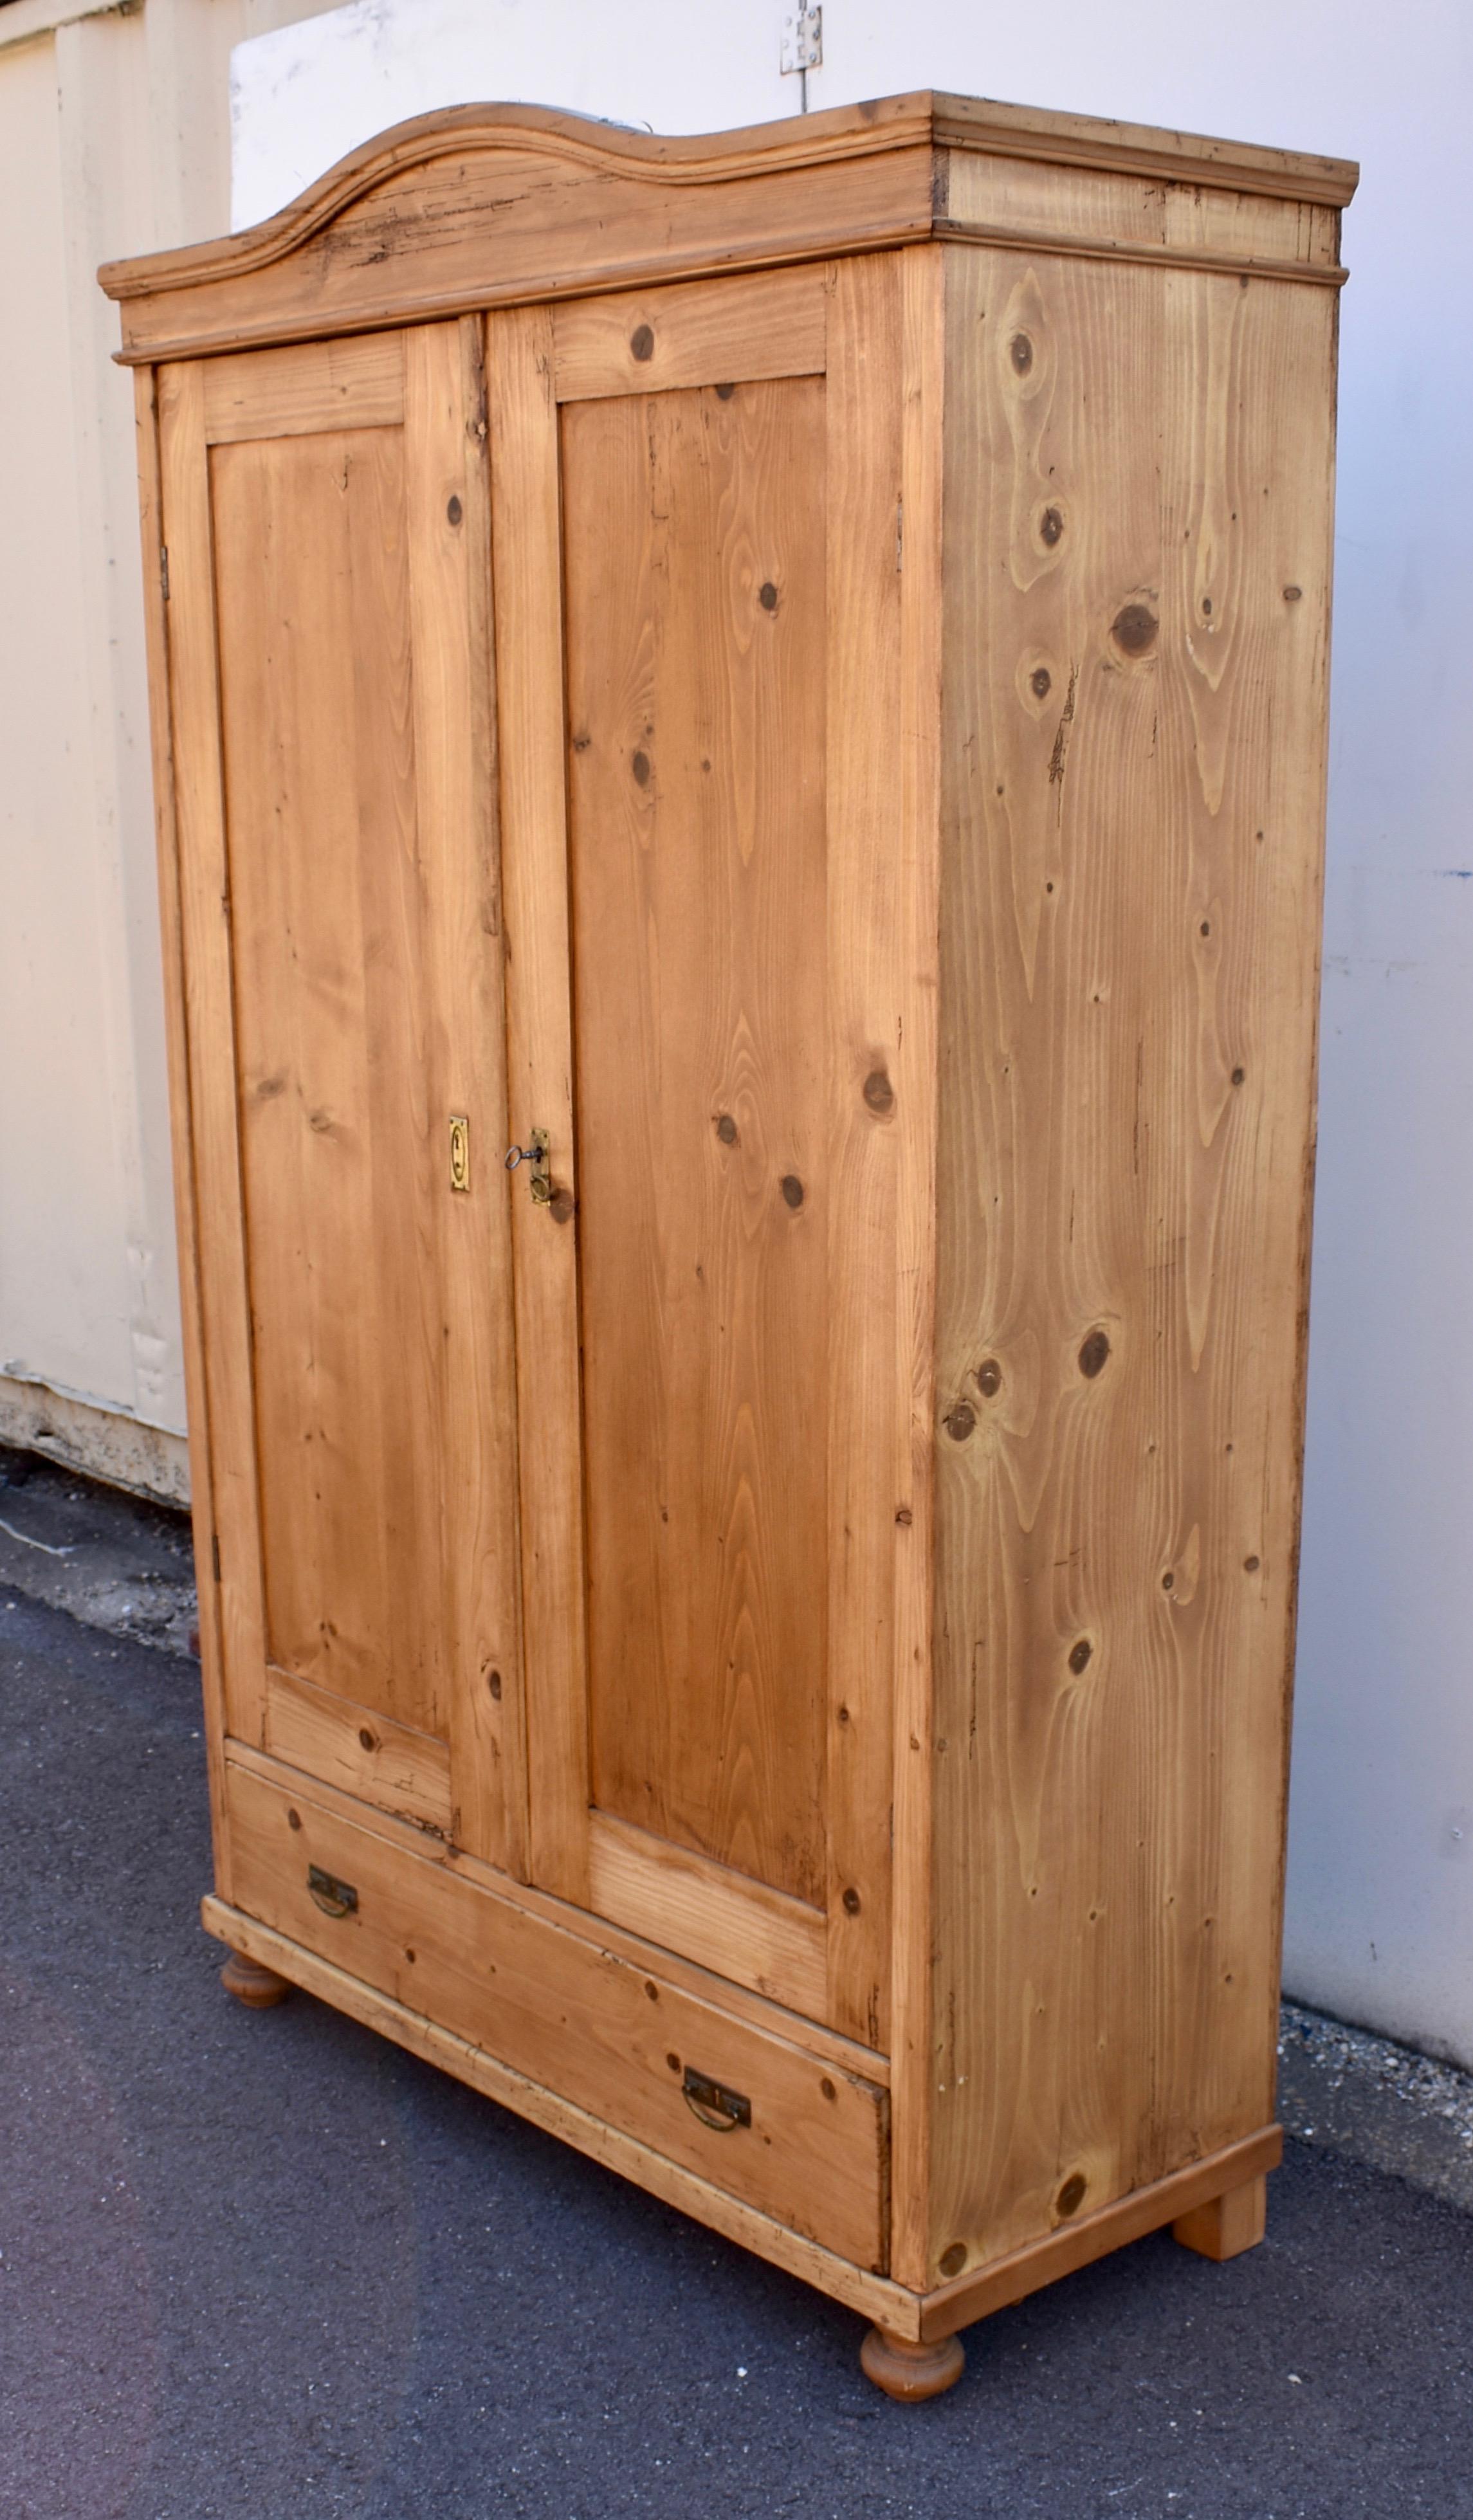 Belgian Pine Bonnet-Top Armoire with Two Doors and One Drawer